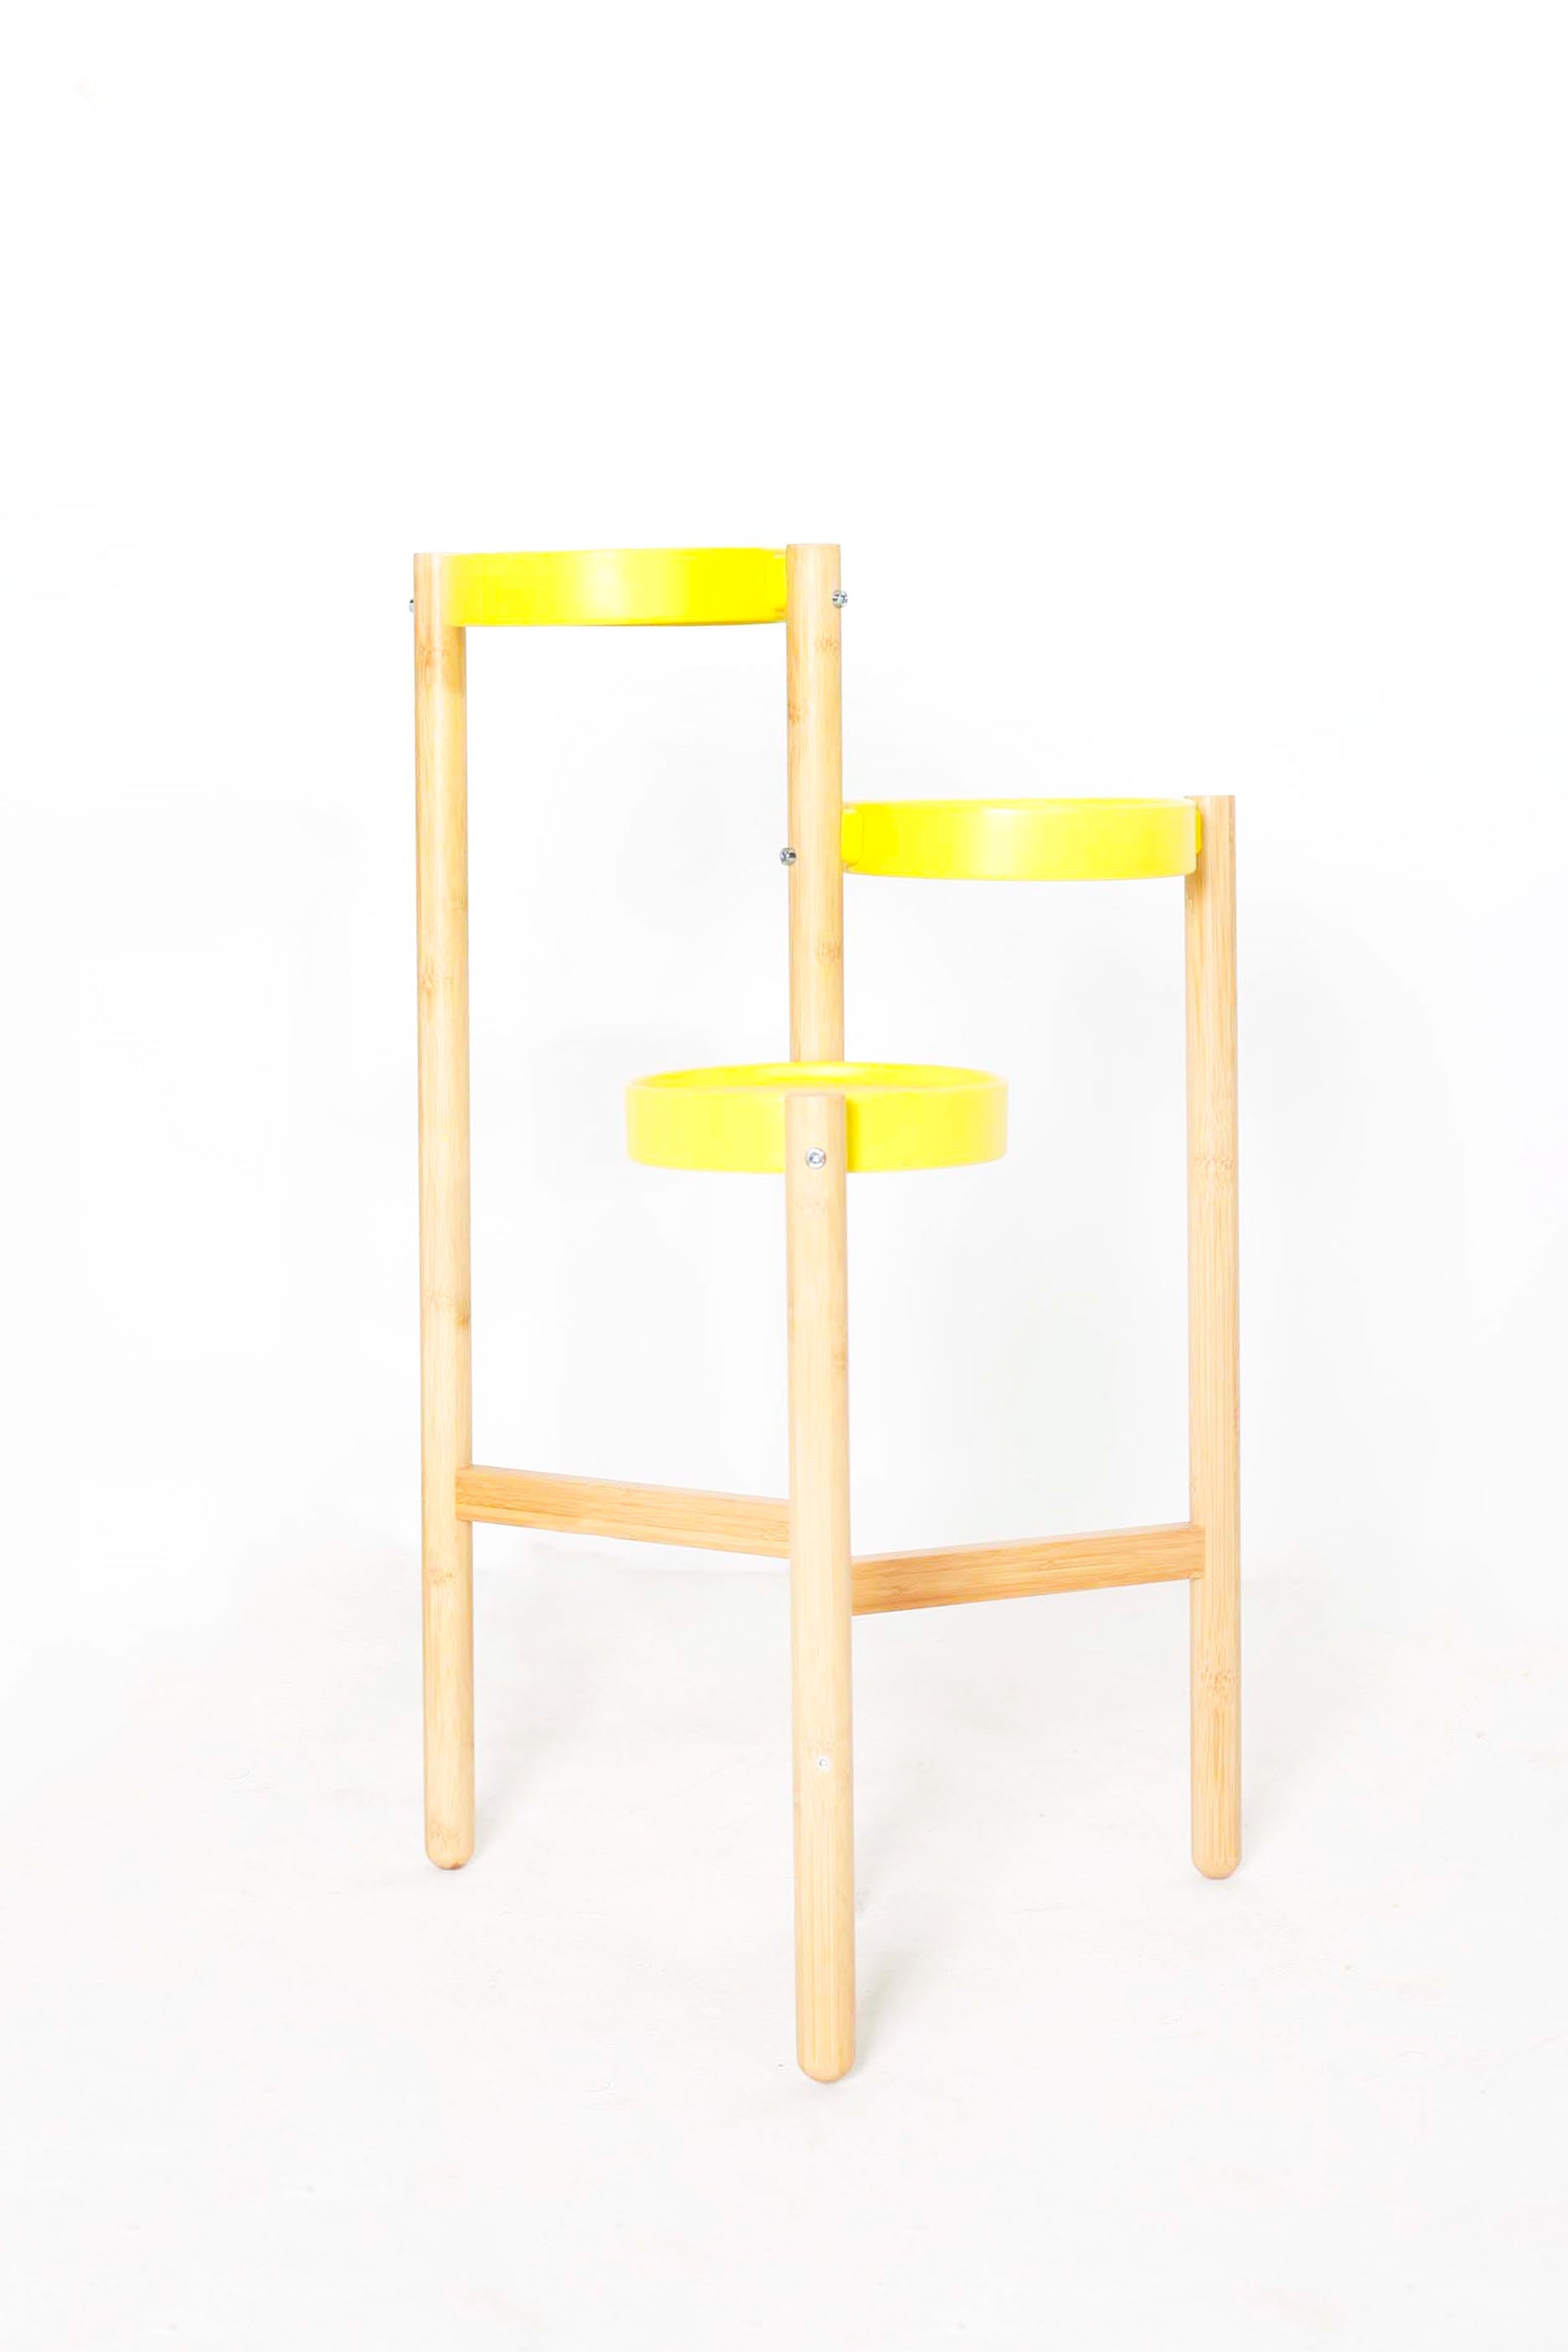 Yellow 3 Tier Plant Stand